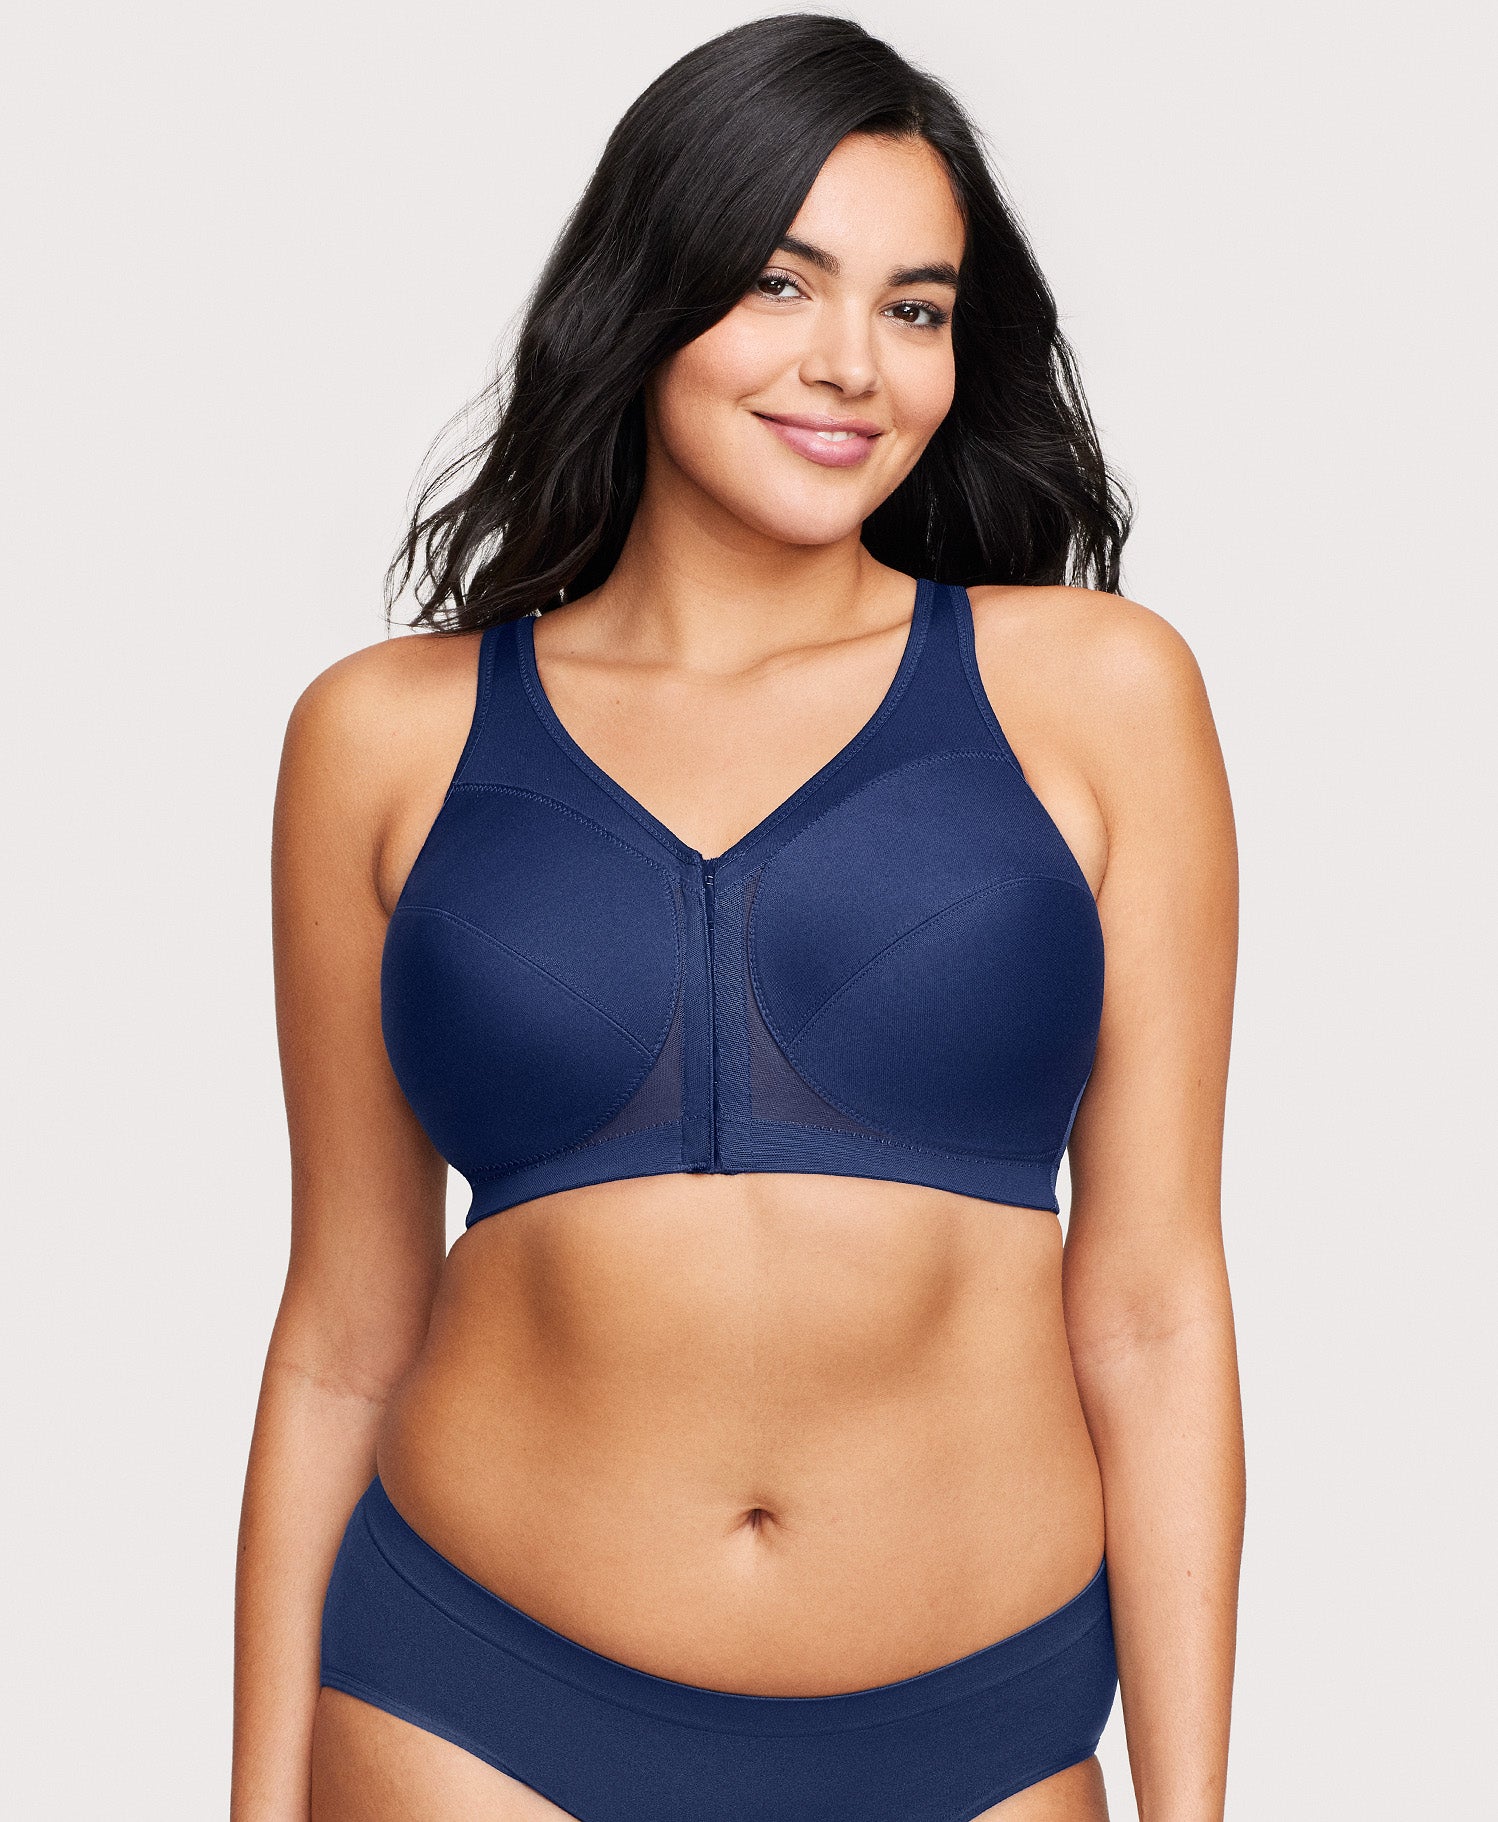 Plus size full cup front closure X back non-padded wireless bra